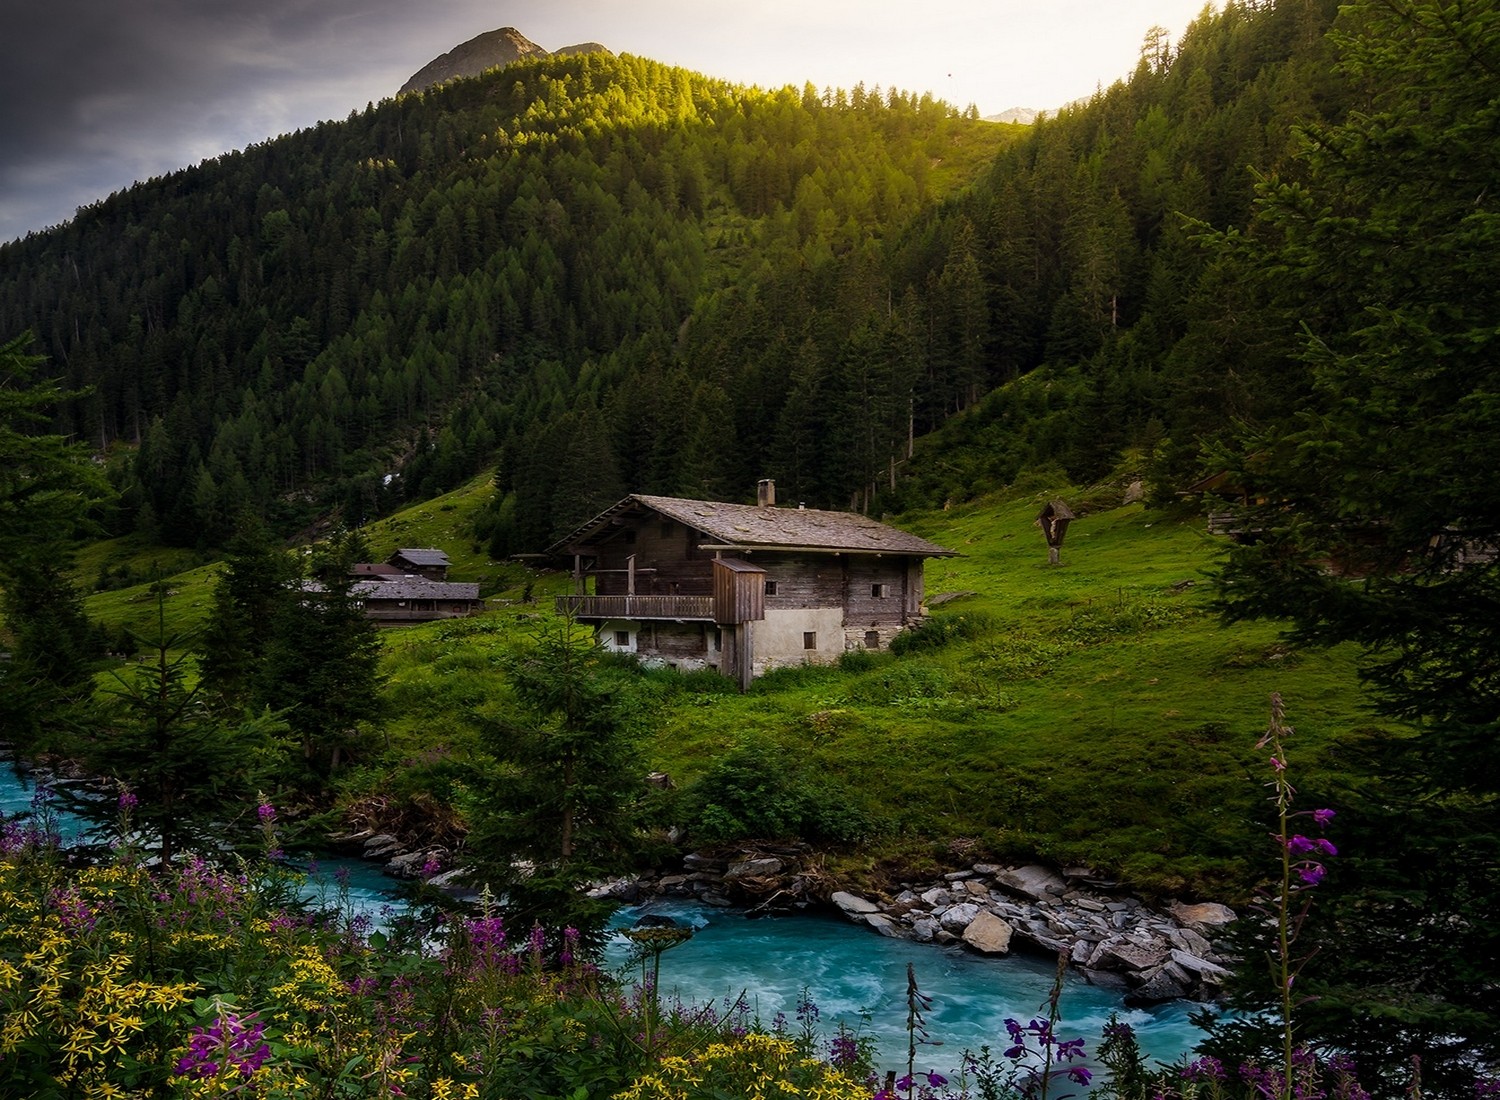 General 1500x1100 nature landscape river cottage forest Alps wildflowers Austria mountains spring trees water green turquoise